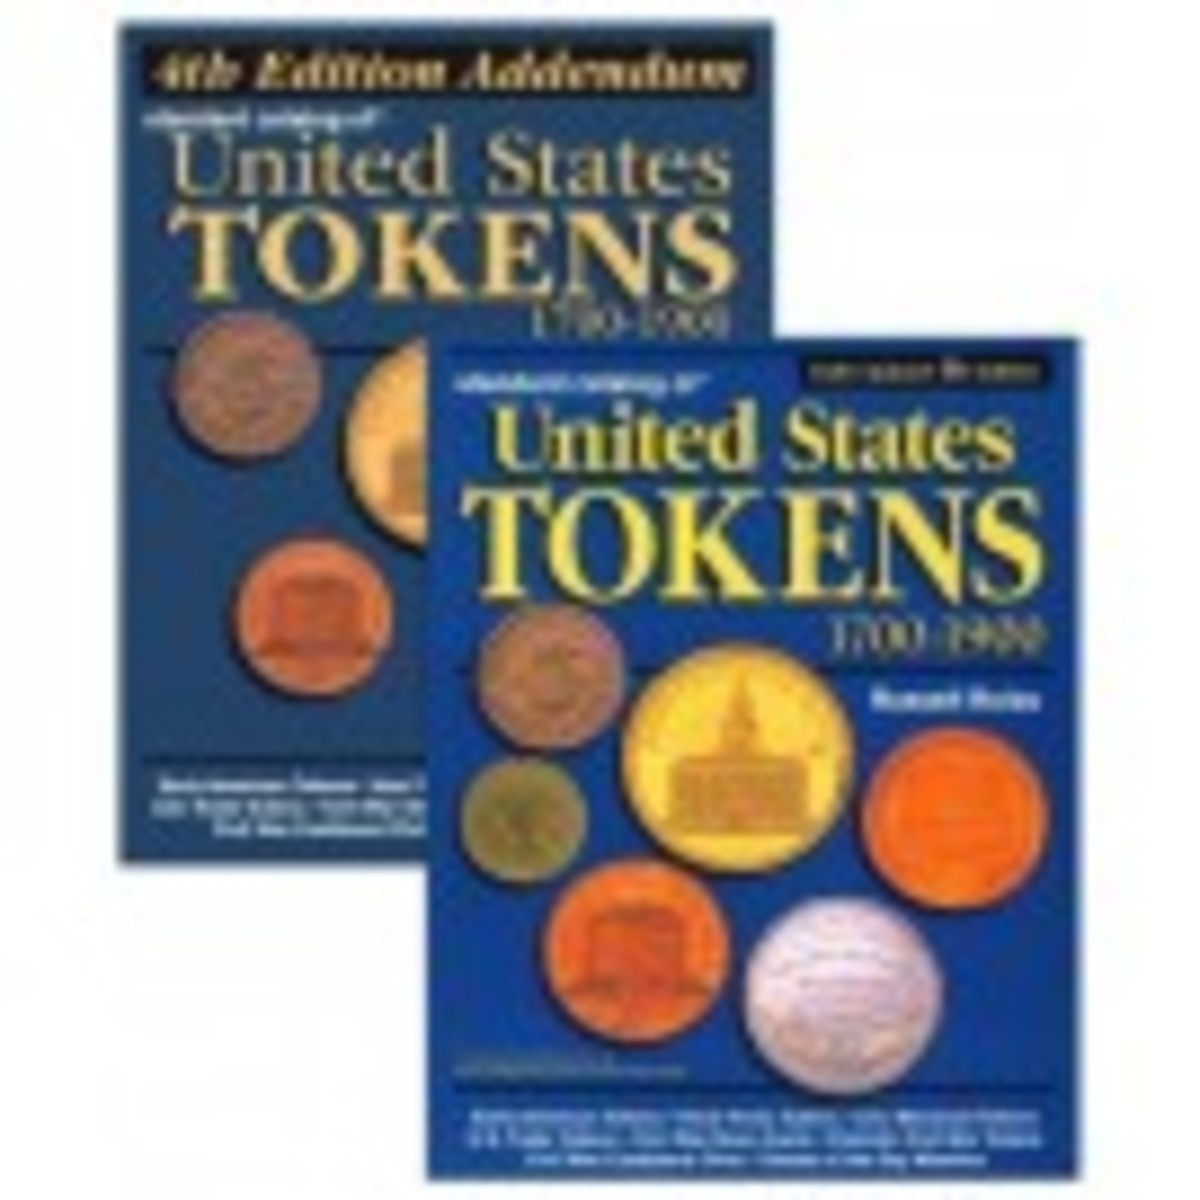 Standard Catalog of United States Tokens Download Duo